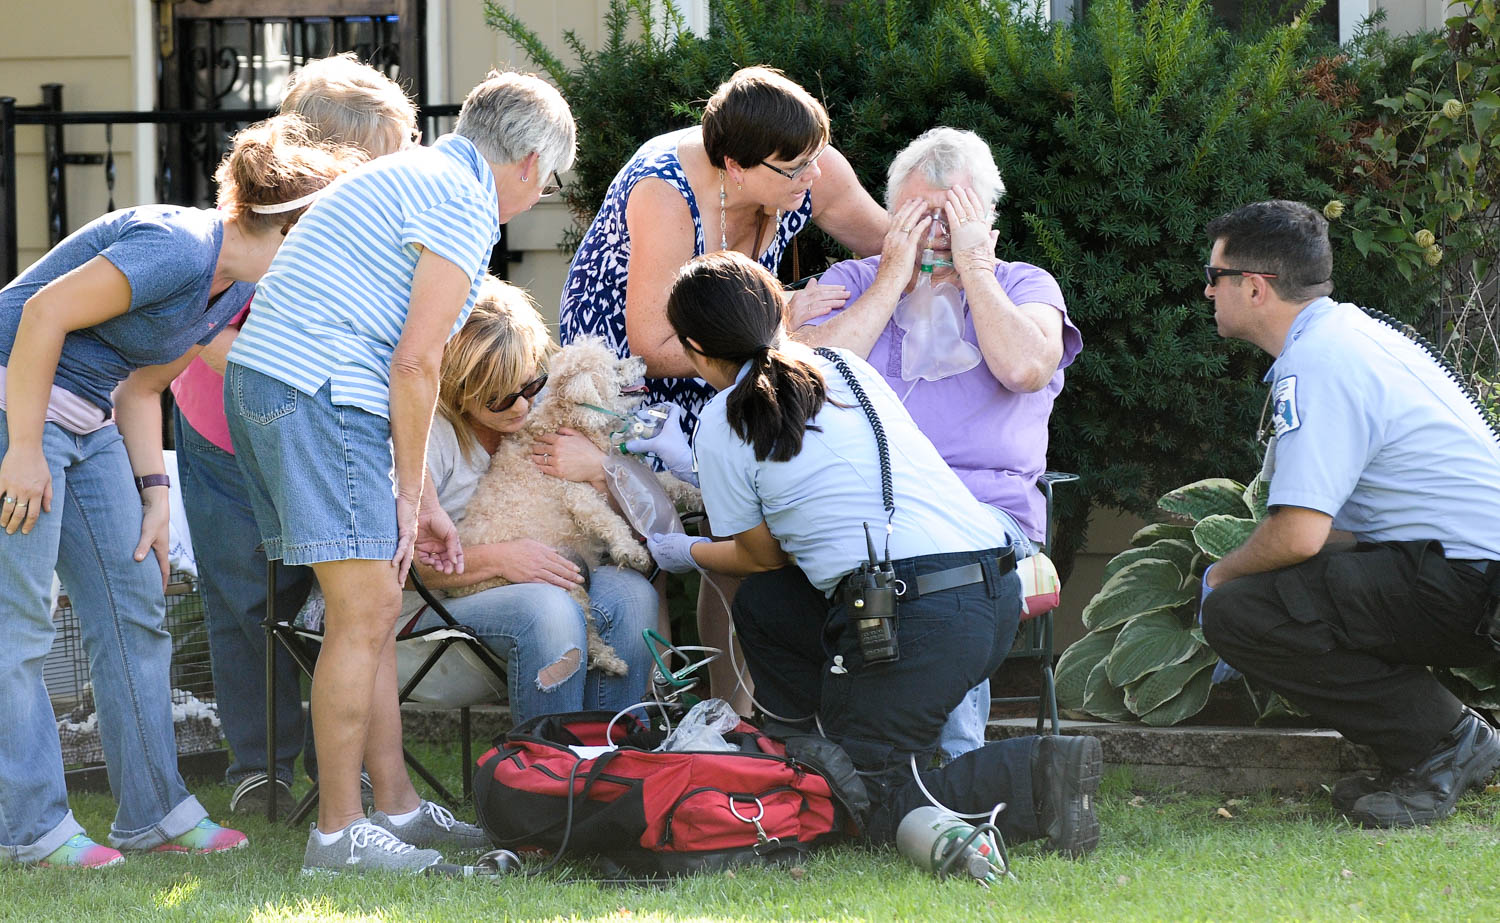 Emergency personnel give oxygen to Pat Myers and her dog, while friends comfort her following a fatal fire at her home, 2413 44th Street Monday, Sept. 12, 2016, in Moline. Mrs. Myers husband, Howard "Dave" D. Myers, 80, died as a result of injuries suffered in the blaze, which broke out in the couple's basement. (Todd Mizener - Dispatch/Argus)